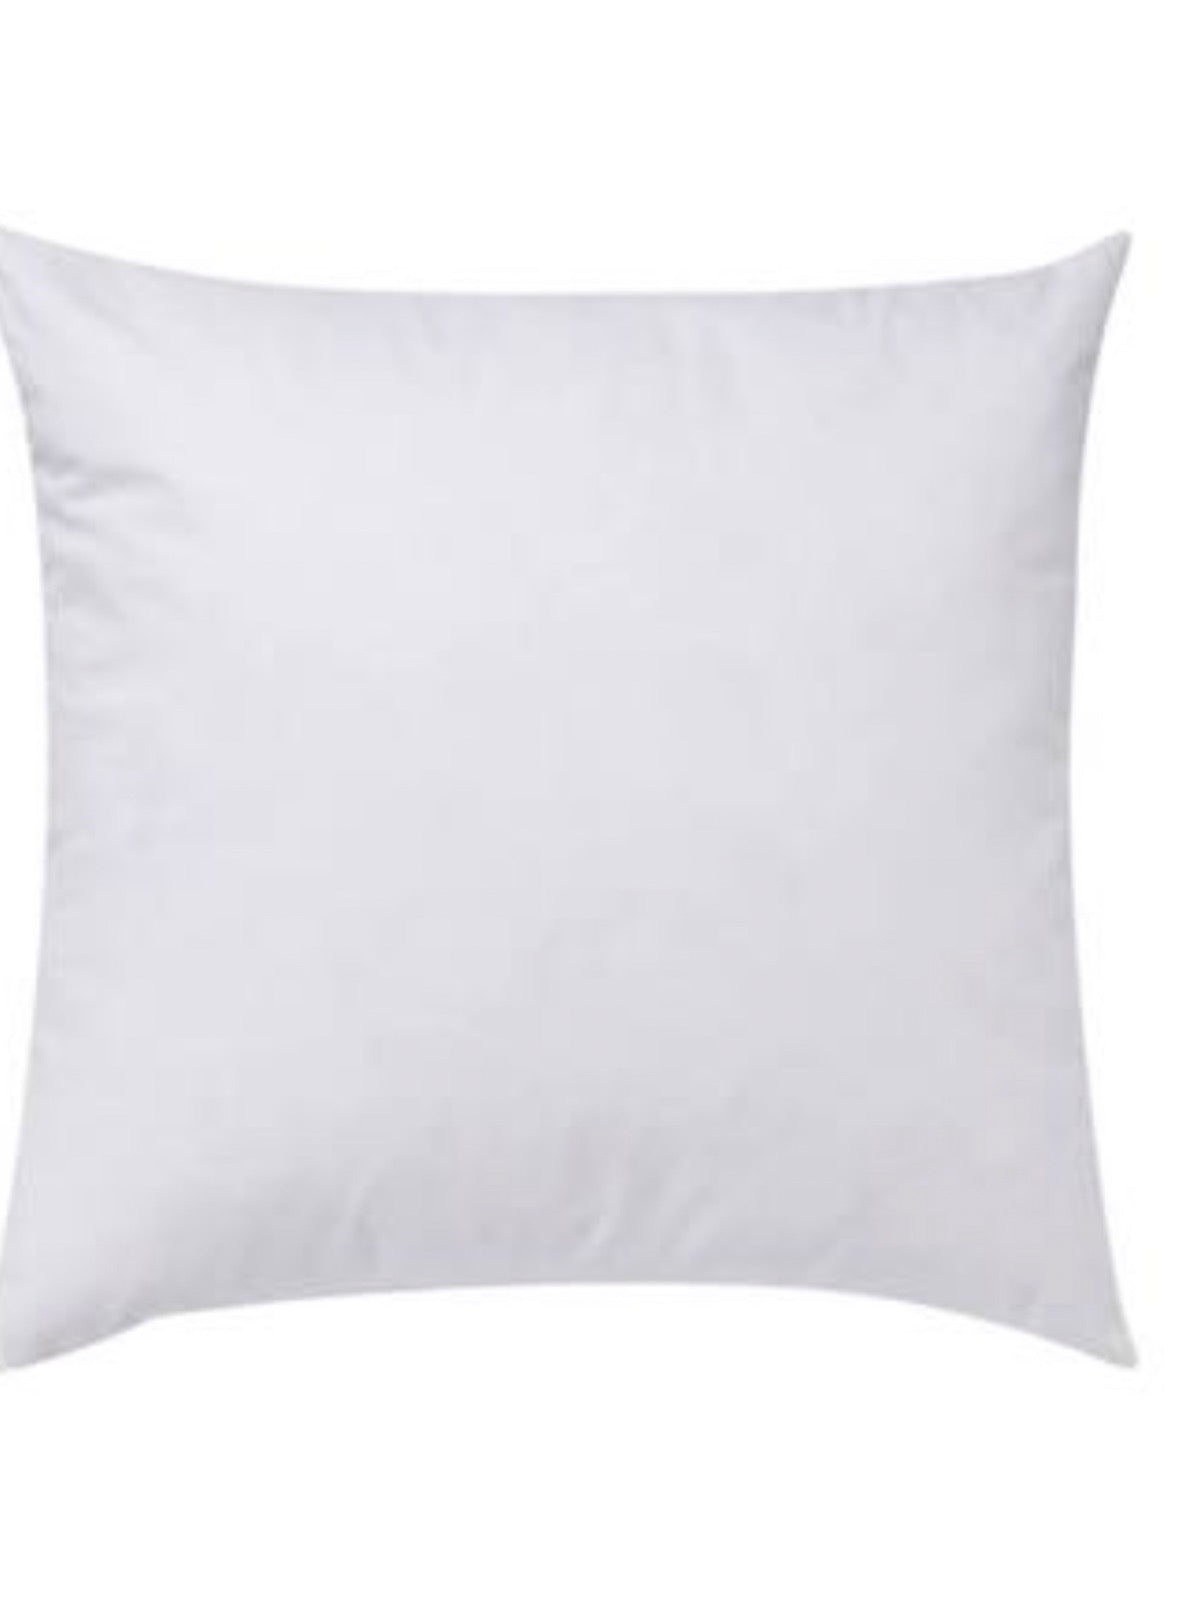 These Plush Poly inserts have a 100% cotton outer fabric and filled with a high-quality poly plush filling. These pillow inserts have a soft pliable feel that can be molded 